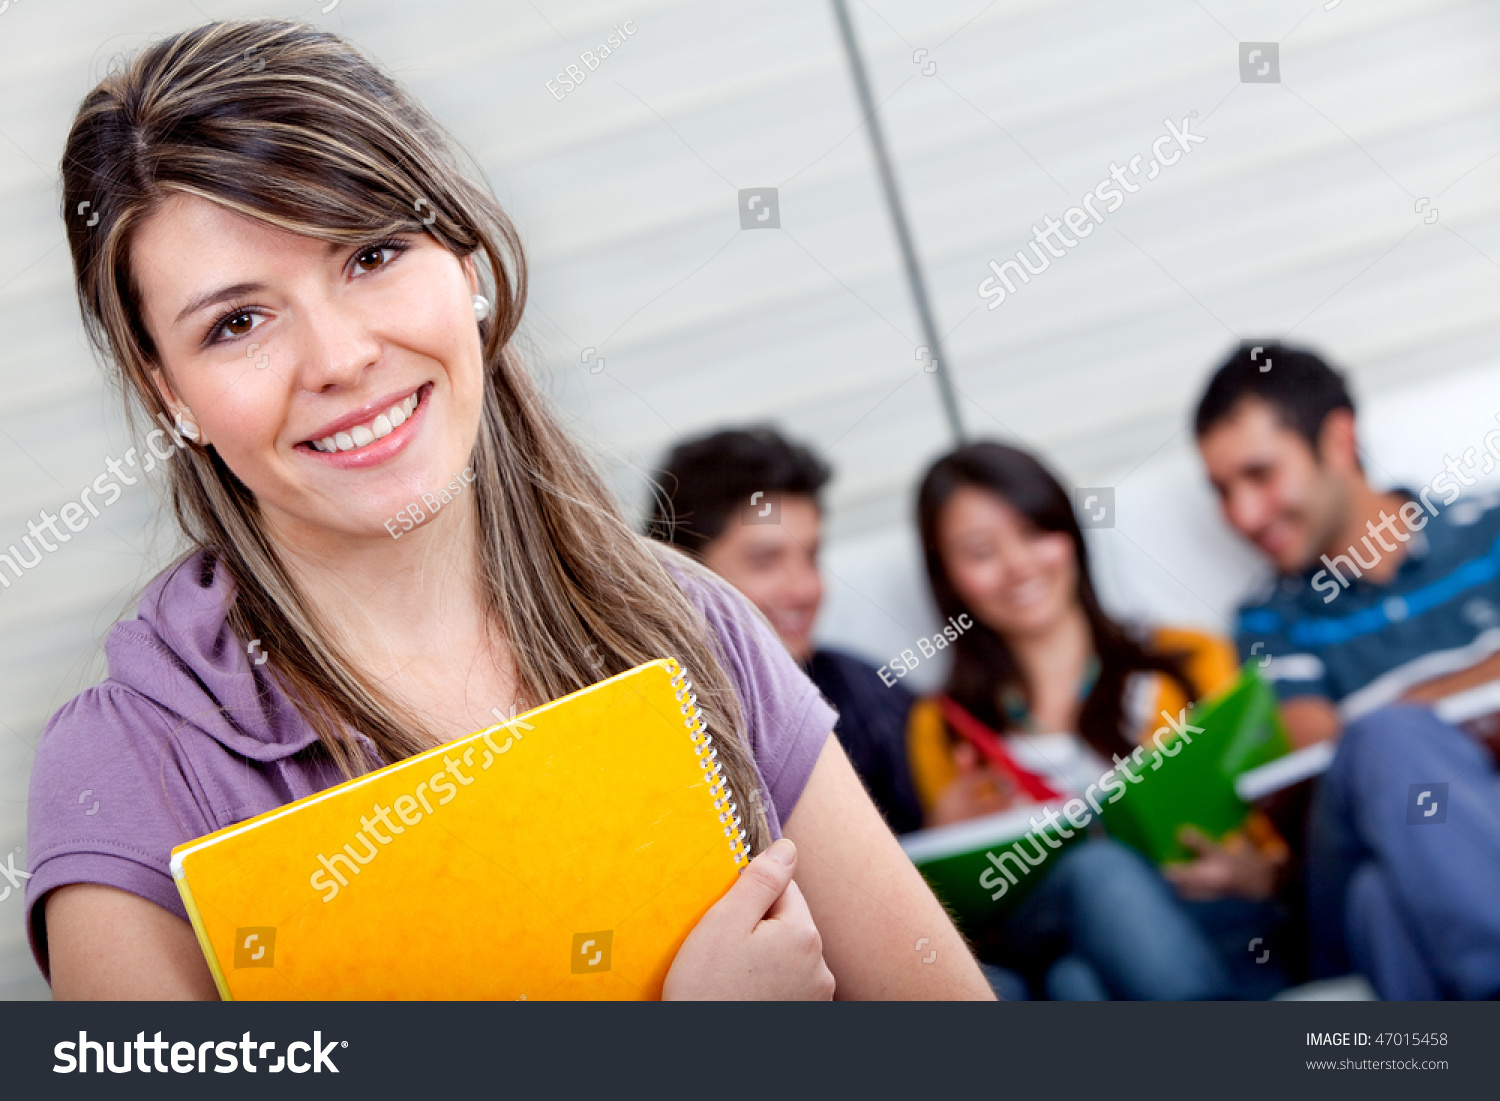 Female student with a group behind isolated over a white background #47015458